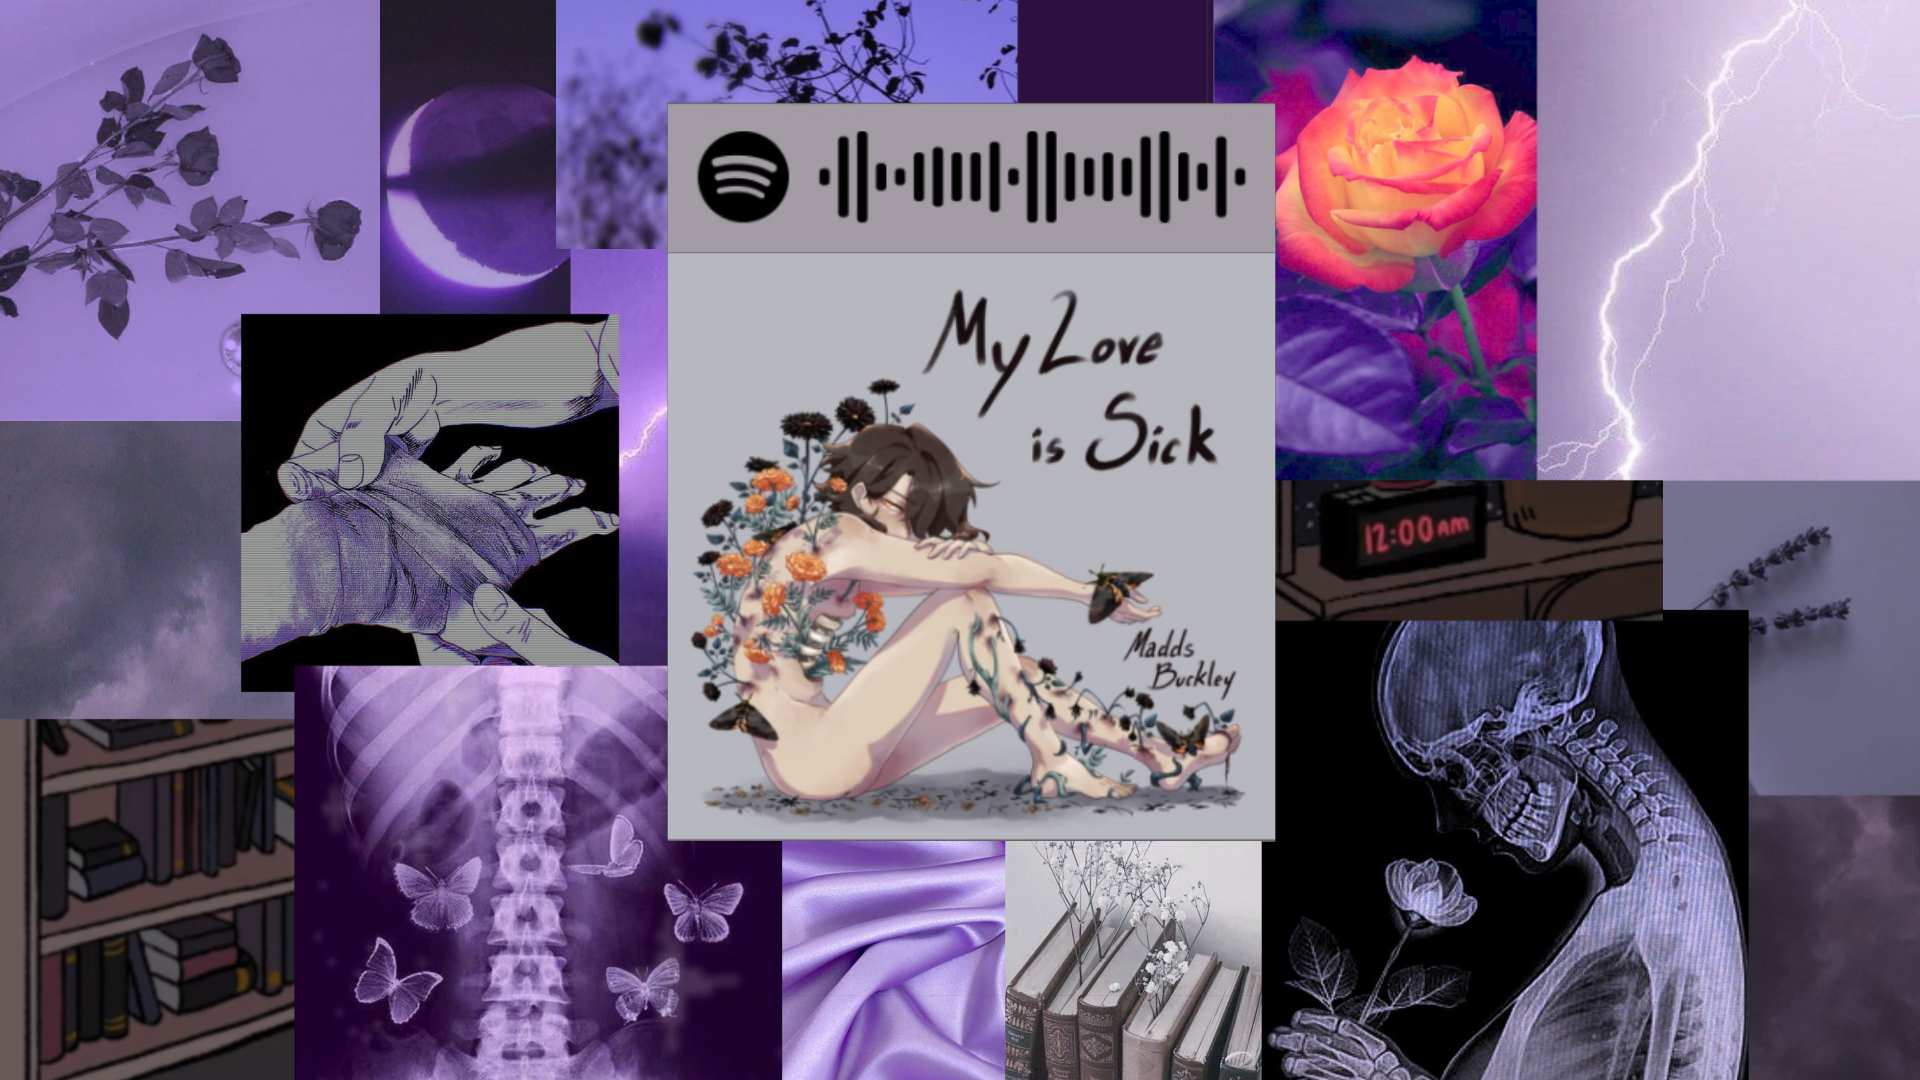 Grey/purple aesthetic wallpaper with various images of flowers, clouds, and skeletons layered around each other, surrounding the cover art for the song 'My Love is Sick', which features a drawing of a girl with orange flowers and butterflies covering her body.